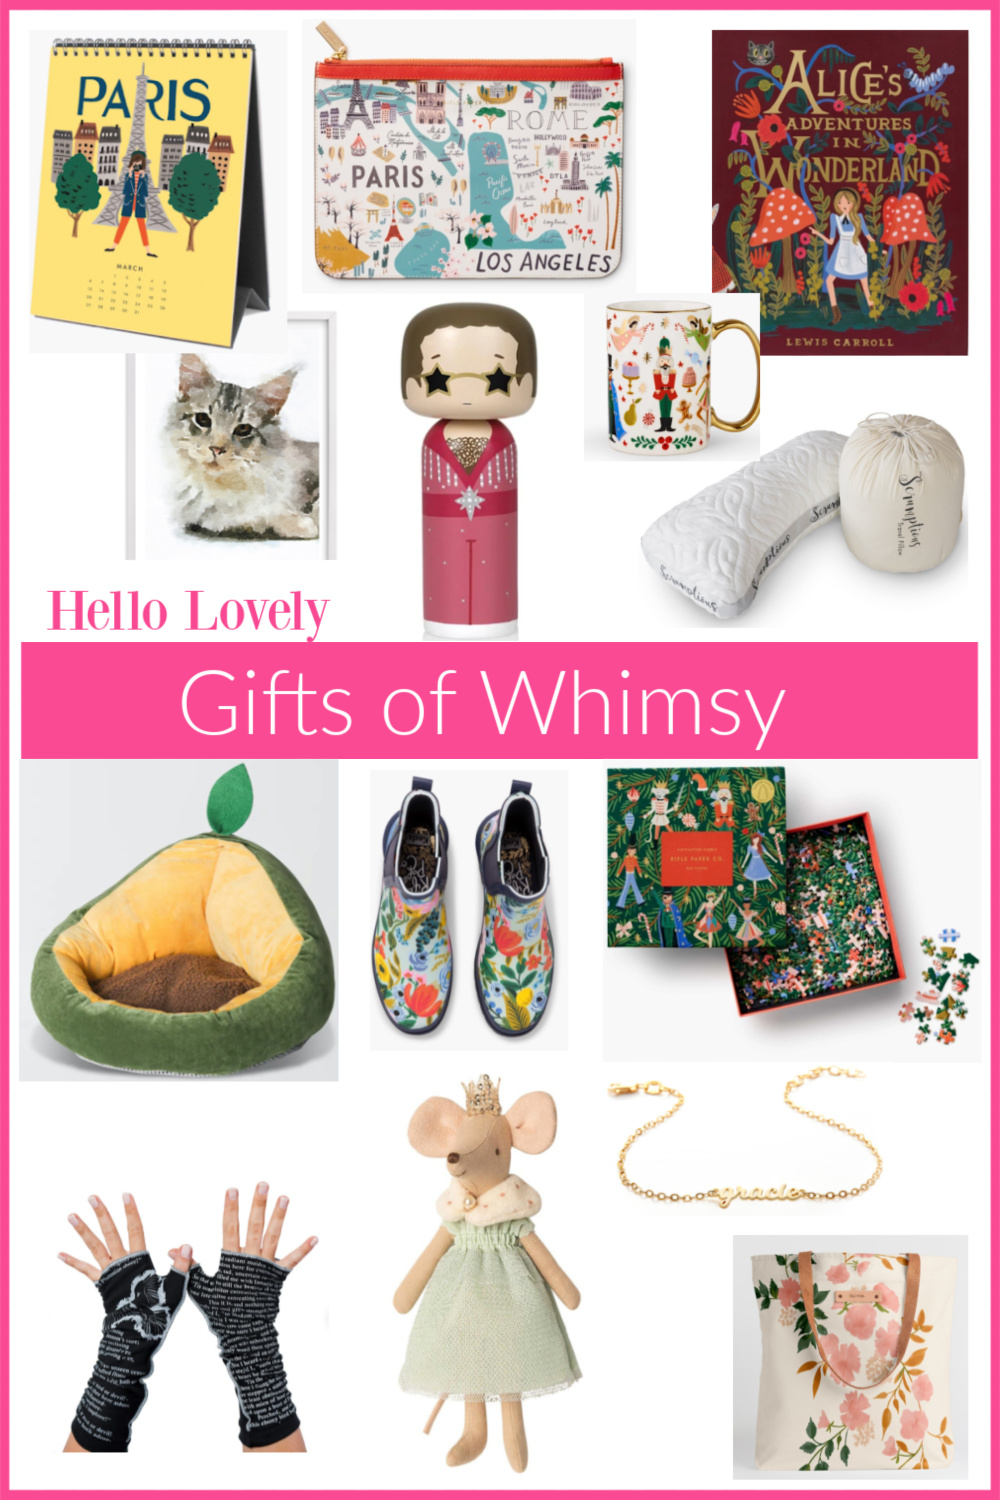 Gift ideas with a lovely whimsical feel to lift spirits and encourage wonder - Hello Lovely. #giftideas #holidaygifts #giftguide